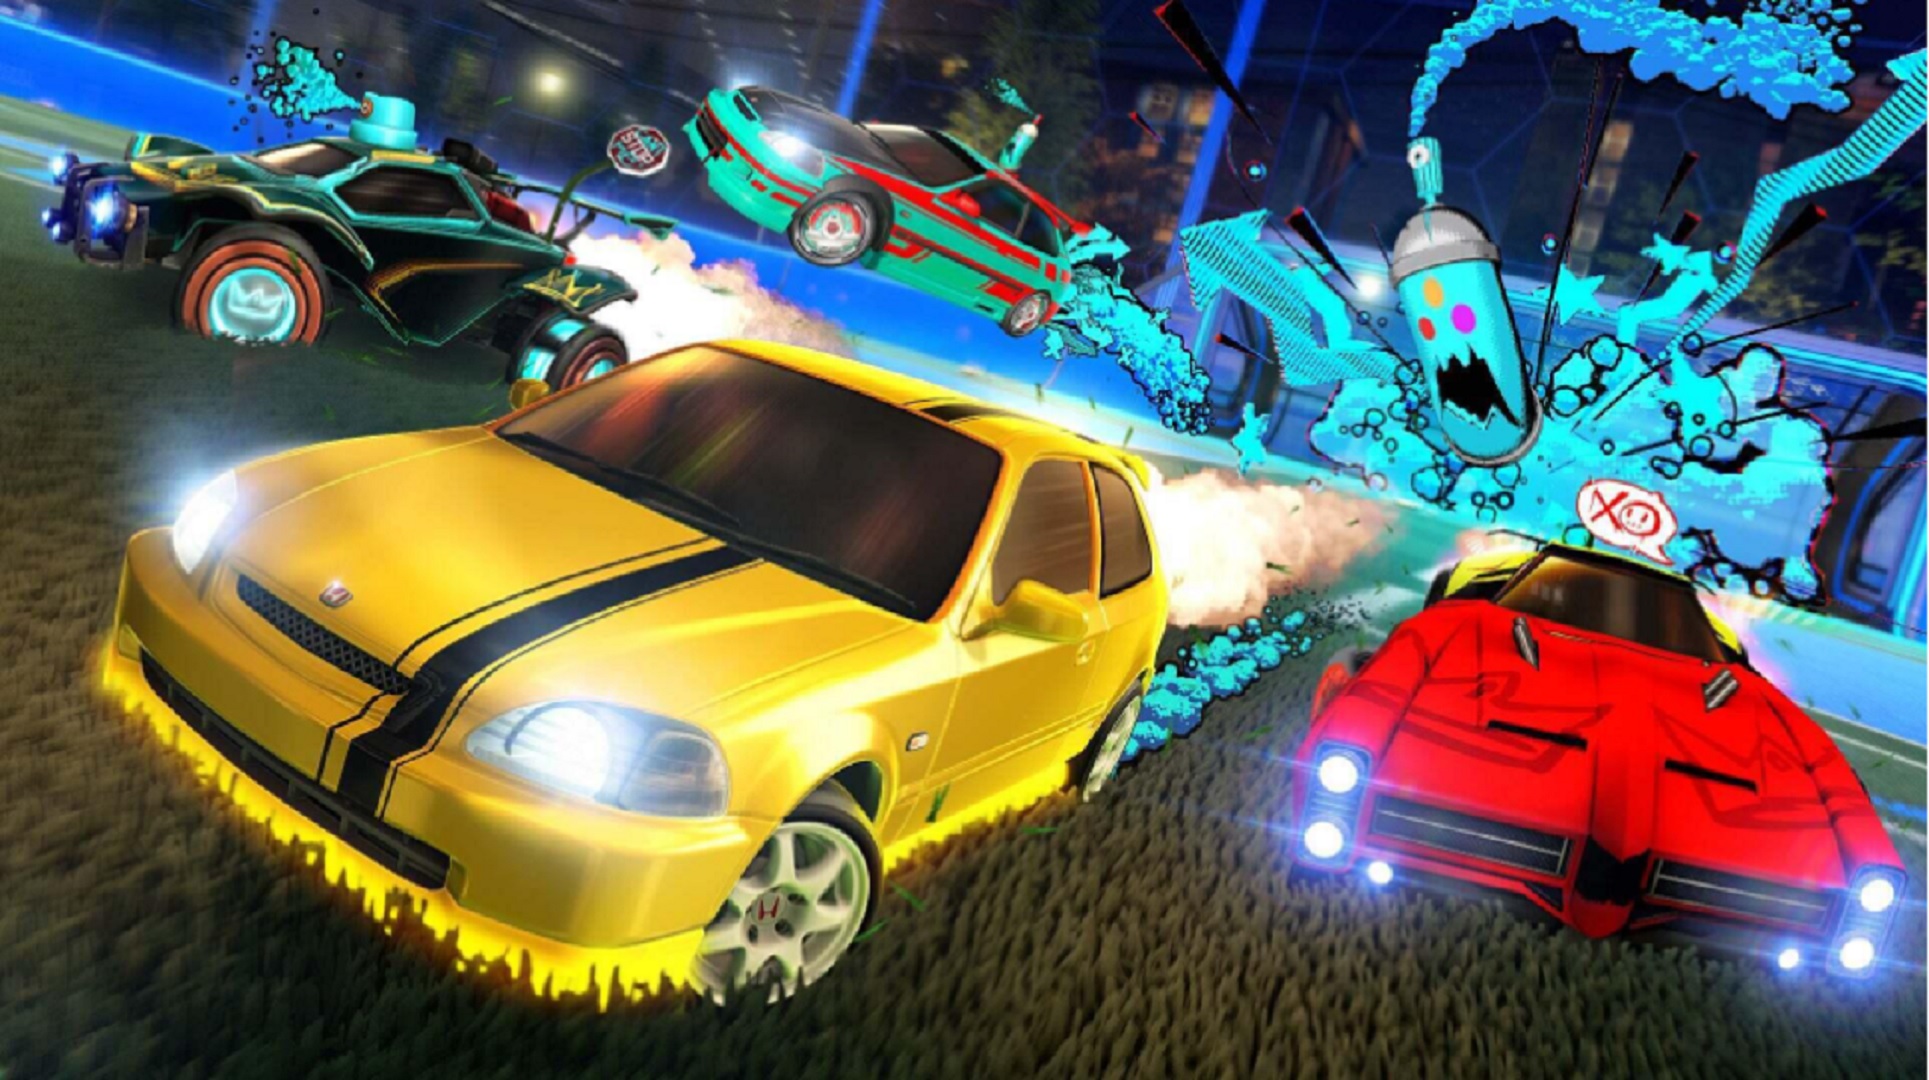 IMG Strikes Deal to Serve as Licensing Agent for 'Rocket League' Game